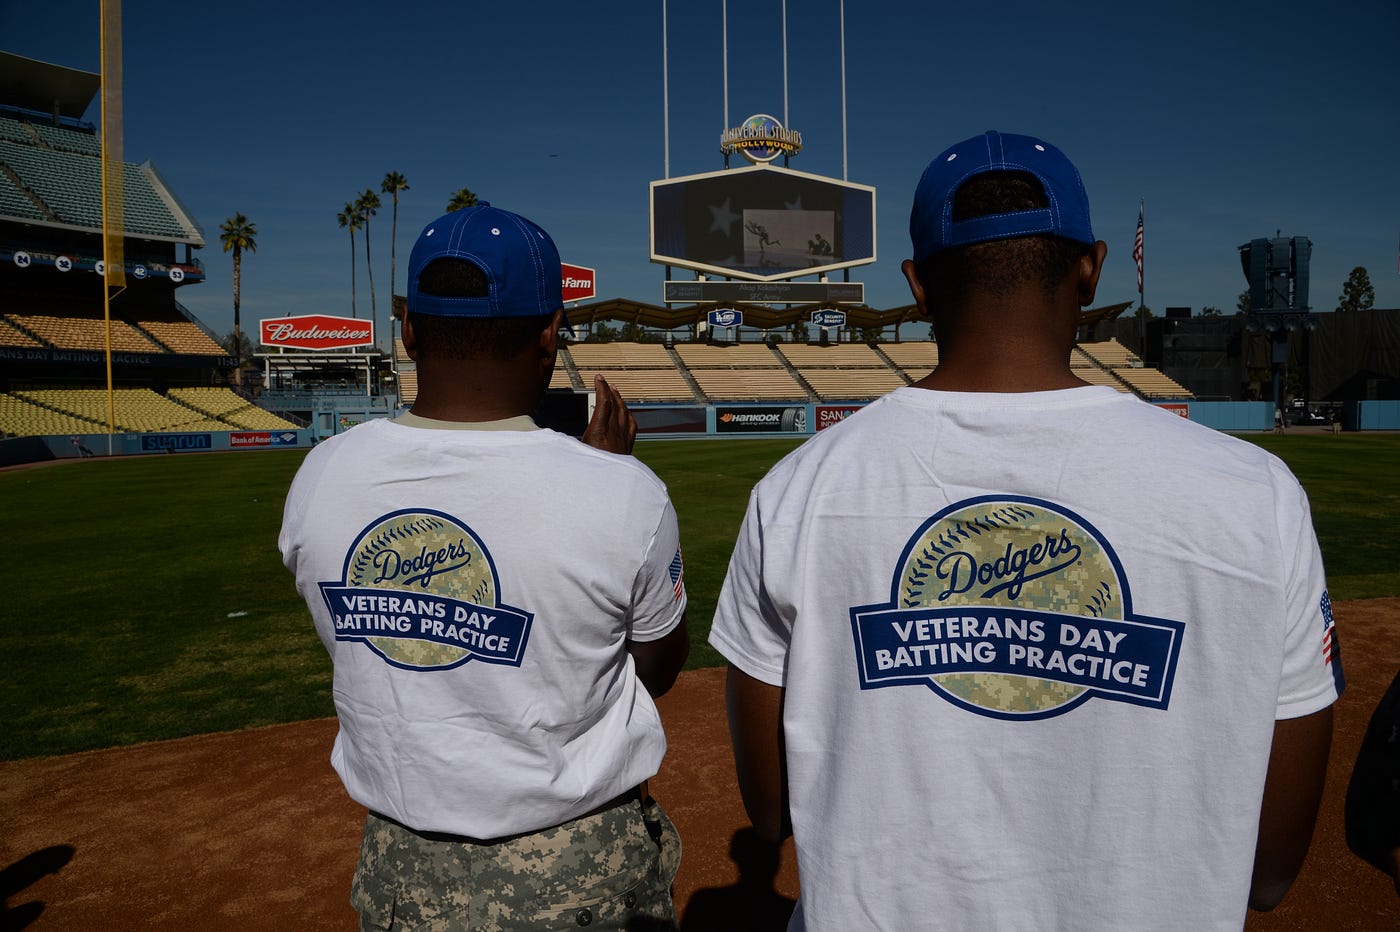 Veterans Day activities include Dodger Stadium batting practice and L.A.  parade with Lasorda | by Yvonne Carrasco | Dodger Insider